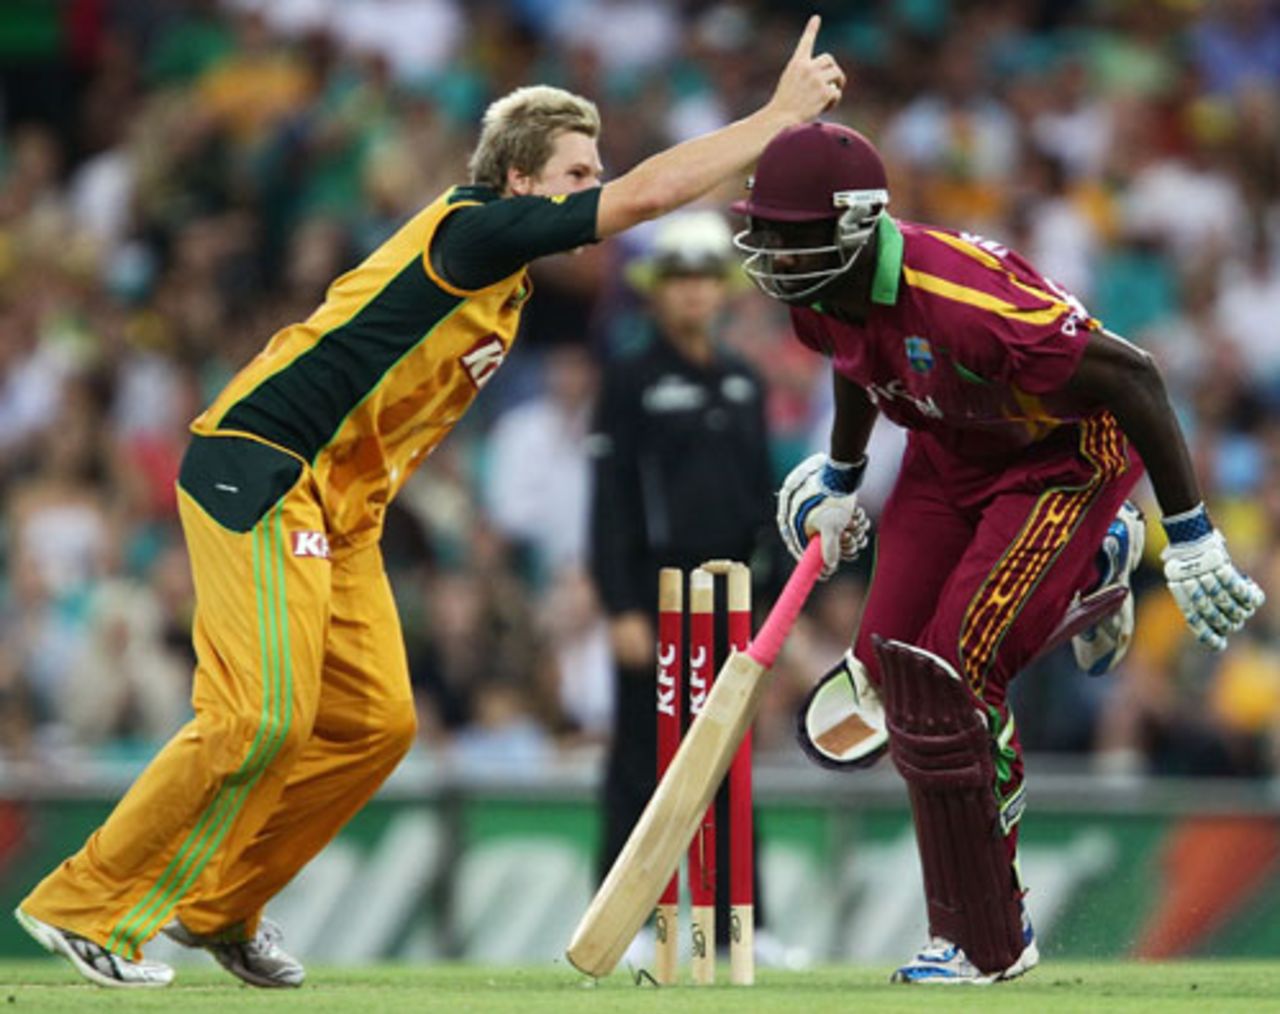 Wavell Hinds is run-out by Cameron White's throw to Steven Smith, Australia v West Indies, 2nd T20, Sydney, February 23, 2010